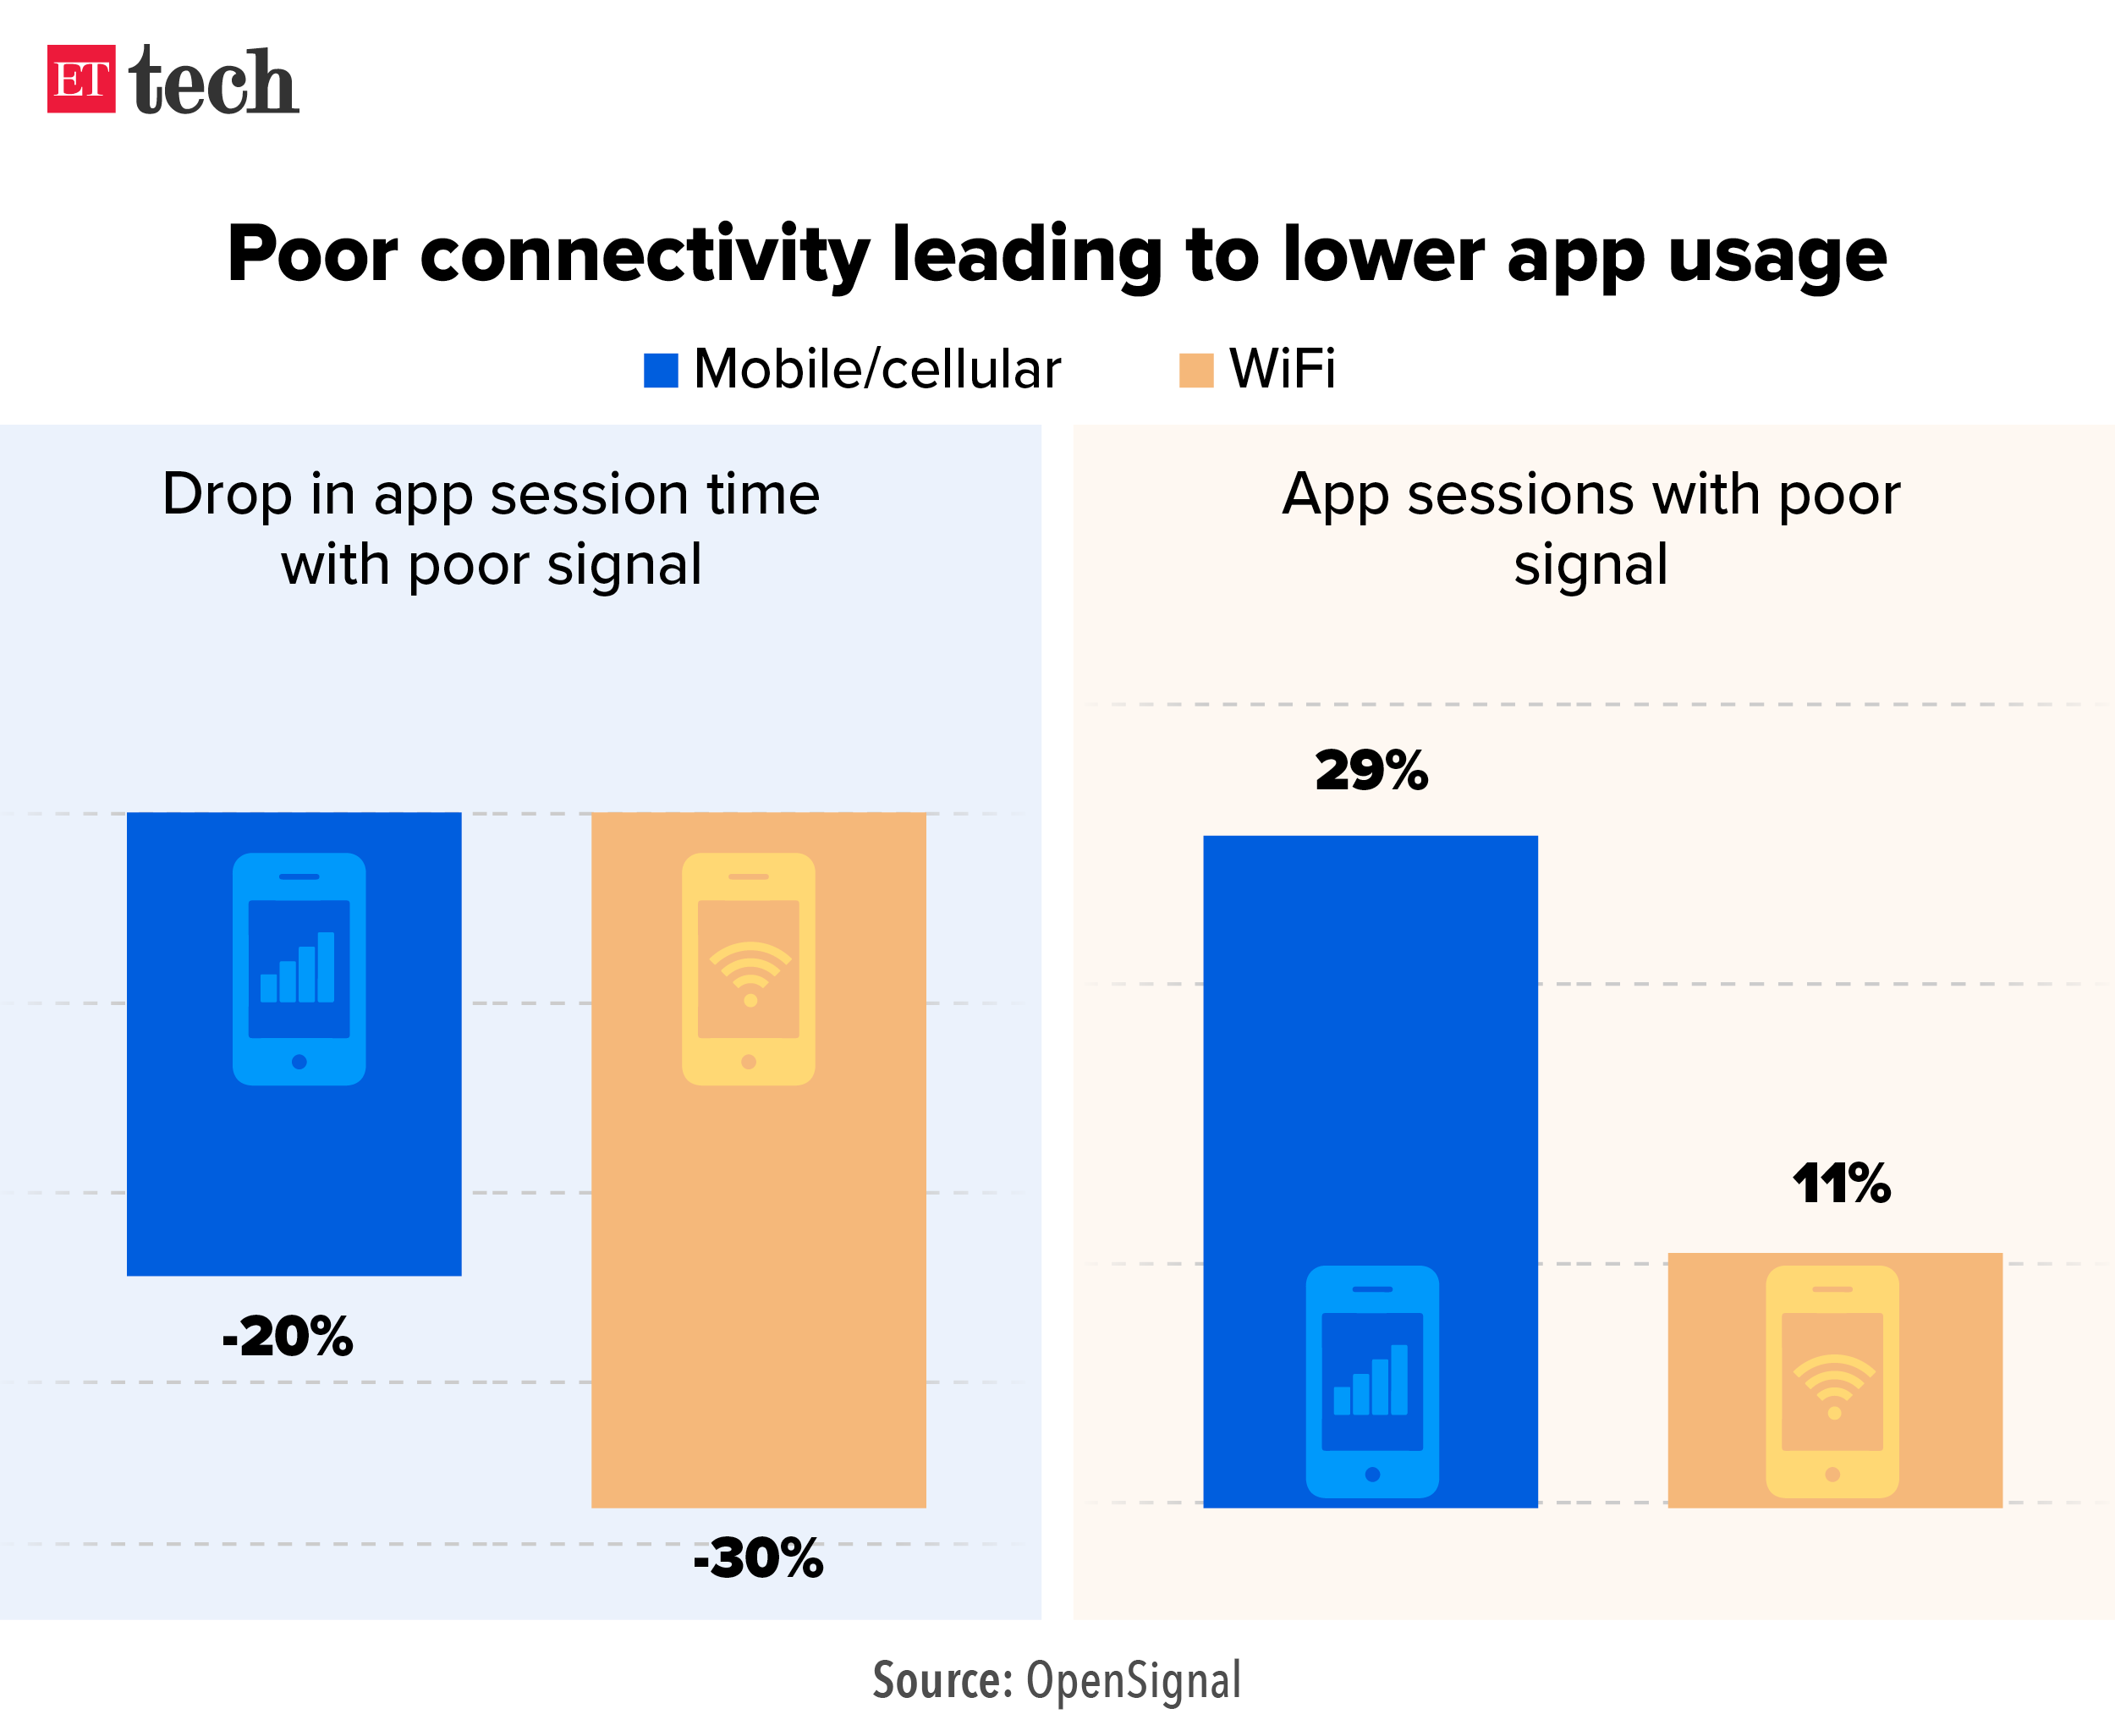 Poor connectivity leading to lower app usage